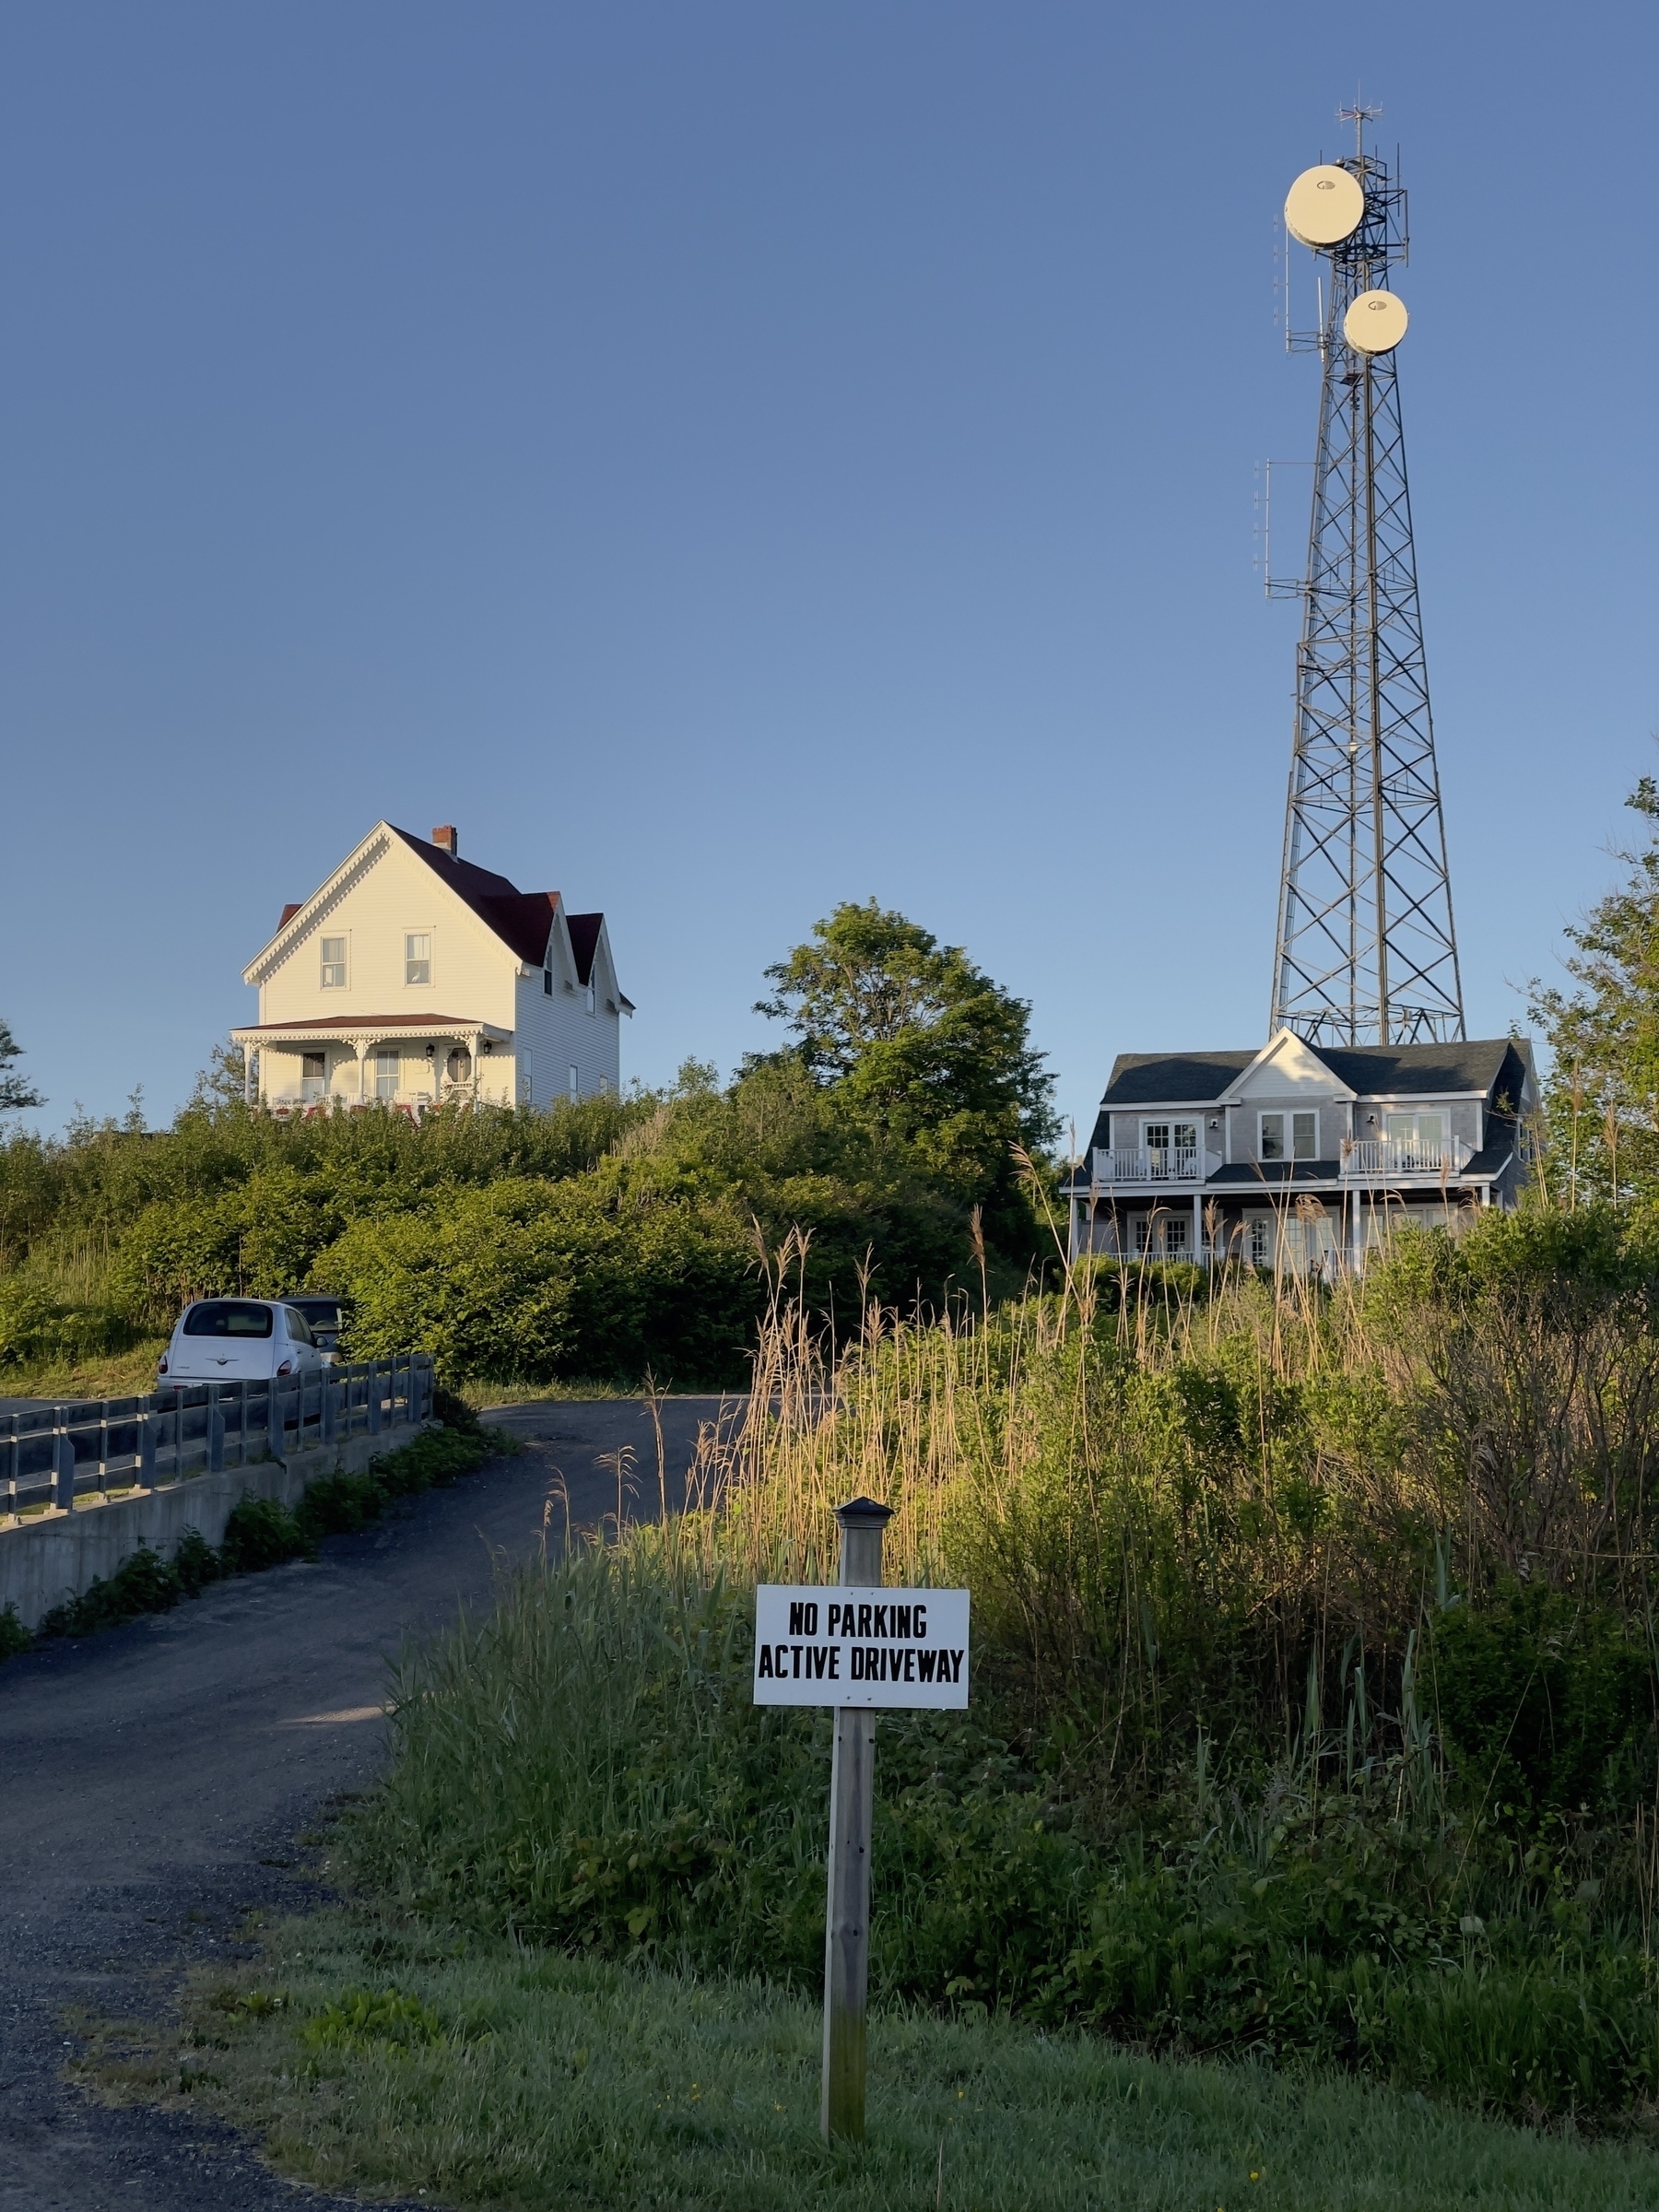 Landscape with houses and cellphone tower in background, no parking sign in foreground.